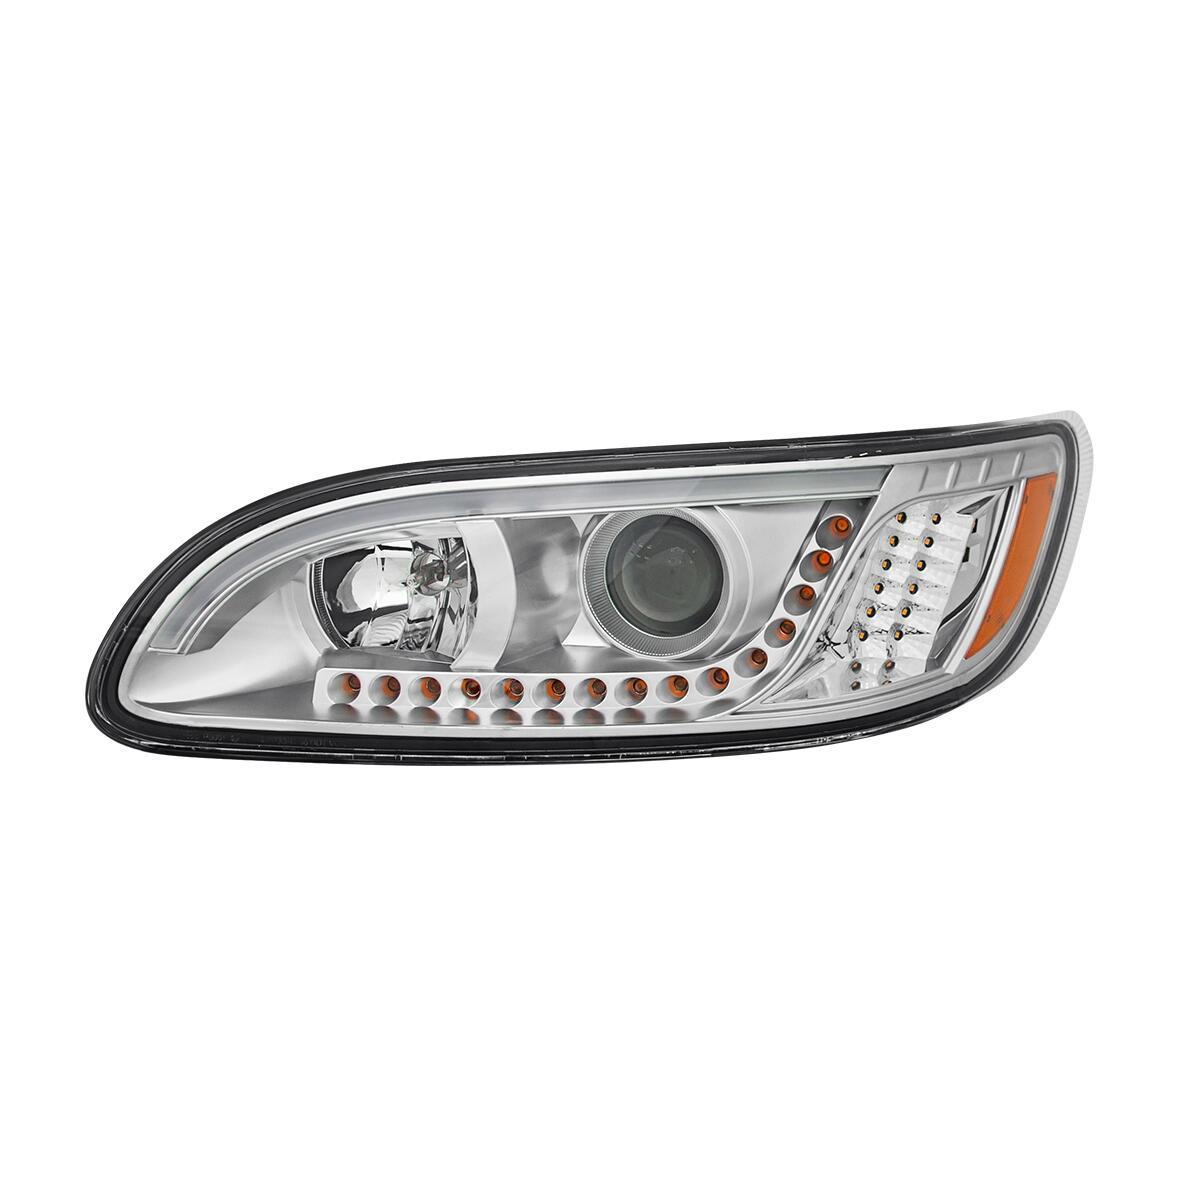 PETERBILT 386/387 HEADLIGHT WITH WHITE HIGH POWER LED POSITION/DAYTIME RUNNING AND LED TURN SIGNAL LIGHT